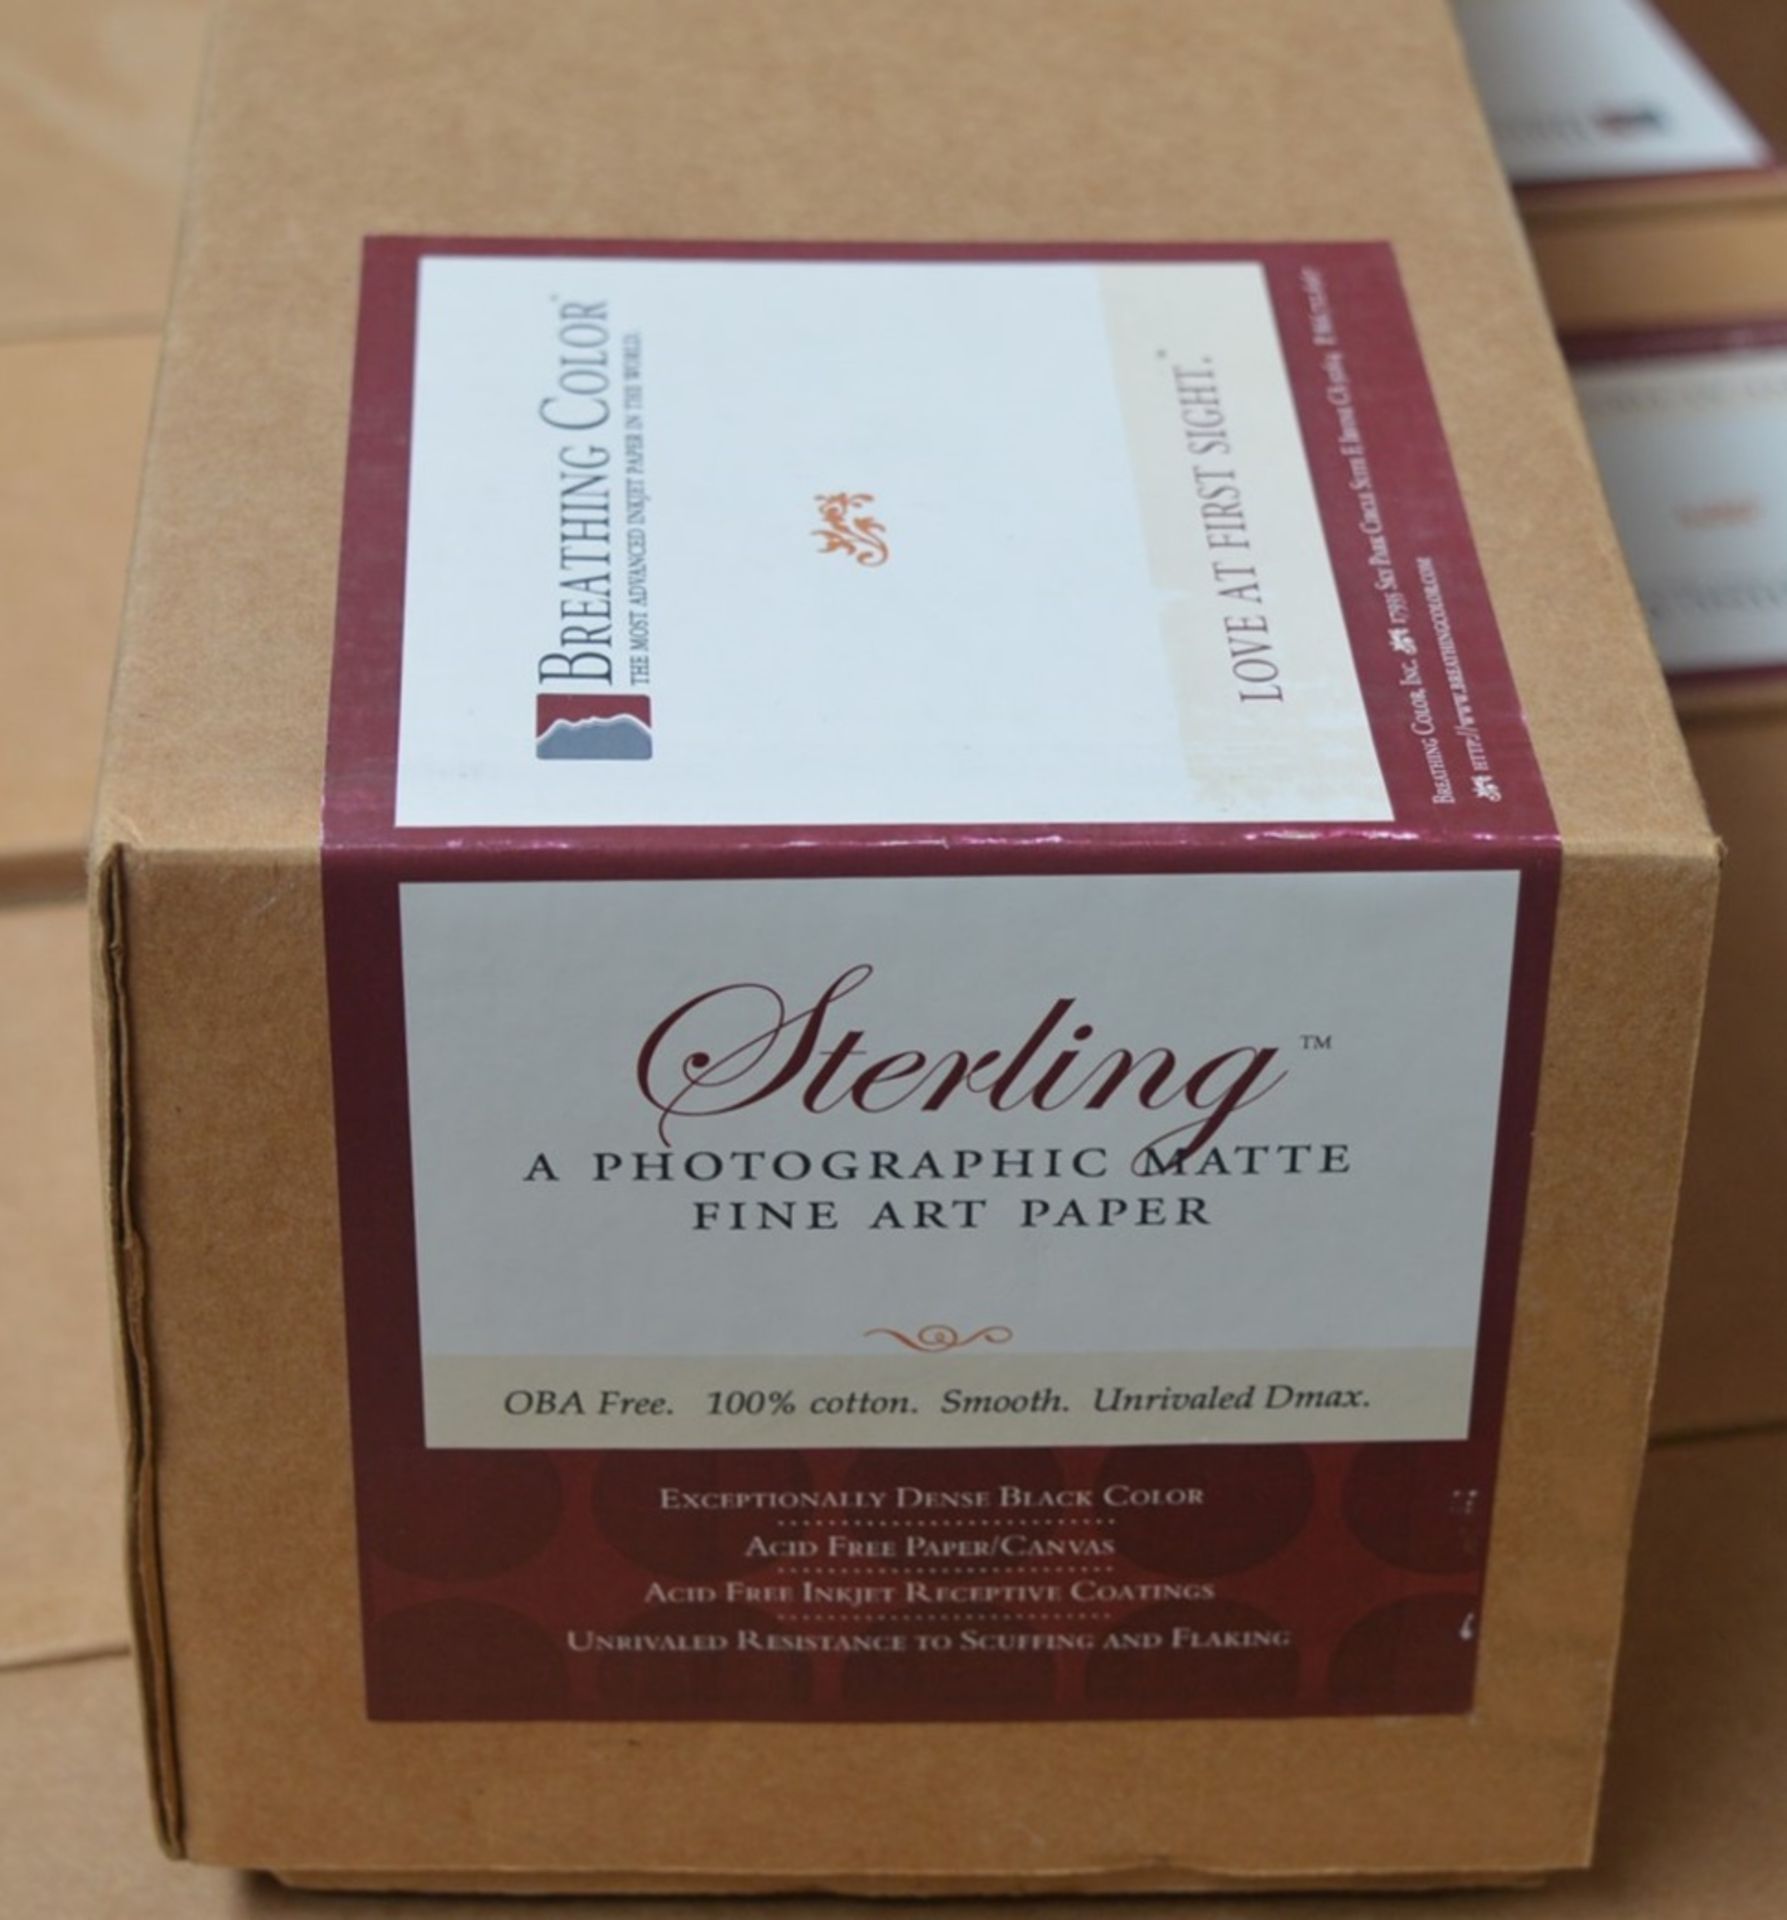 1 x Roll of Breathing Colour STERLING Photographic Matte Fine Art Paper - Size 17" x 50' - - Image 2 of 5